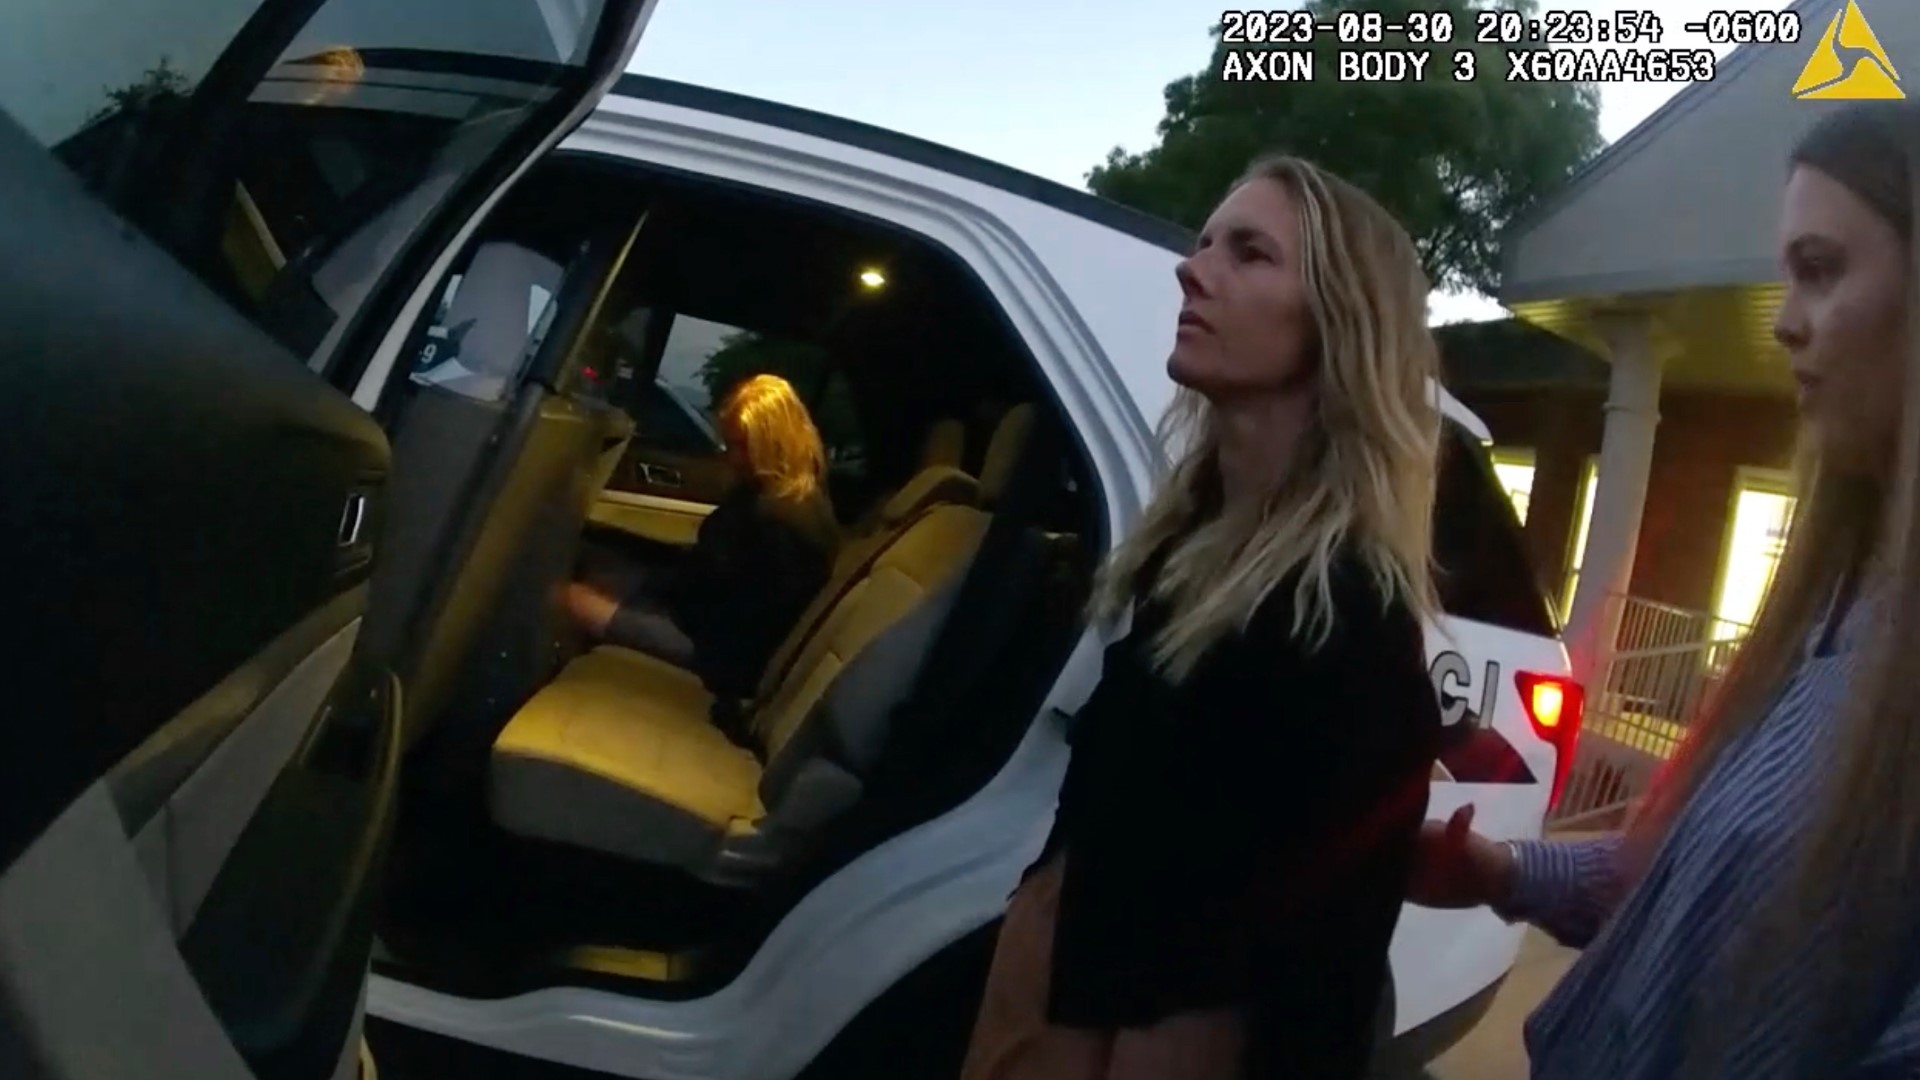 The arrest of former YouTube creator Ruby Franke is shown on police bodycam video that's been released.